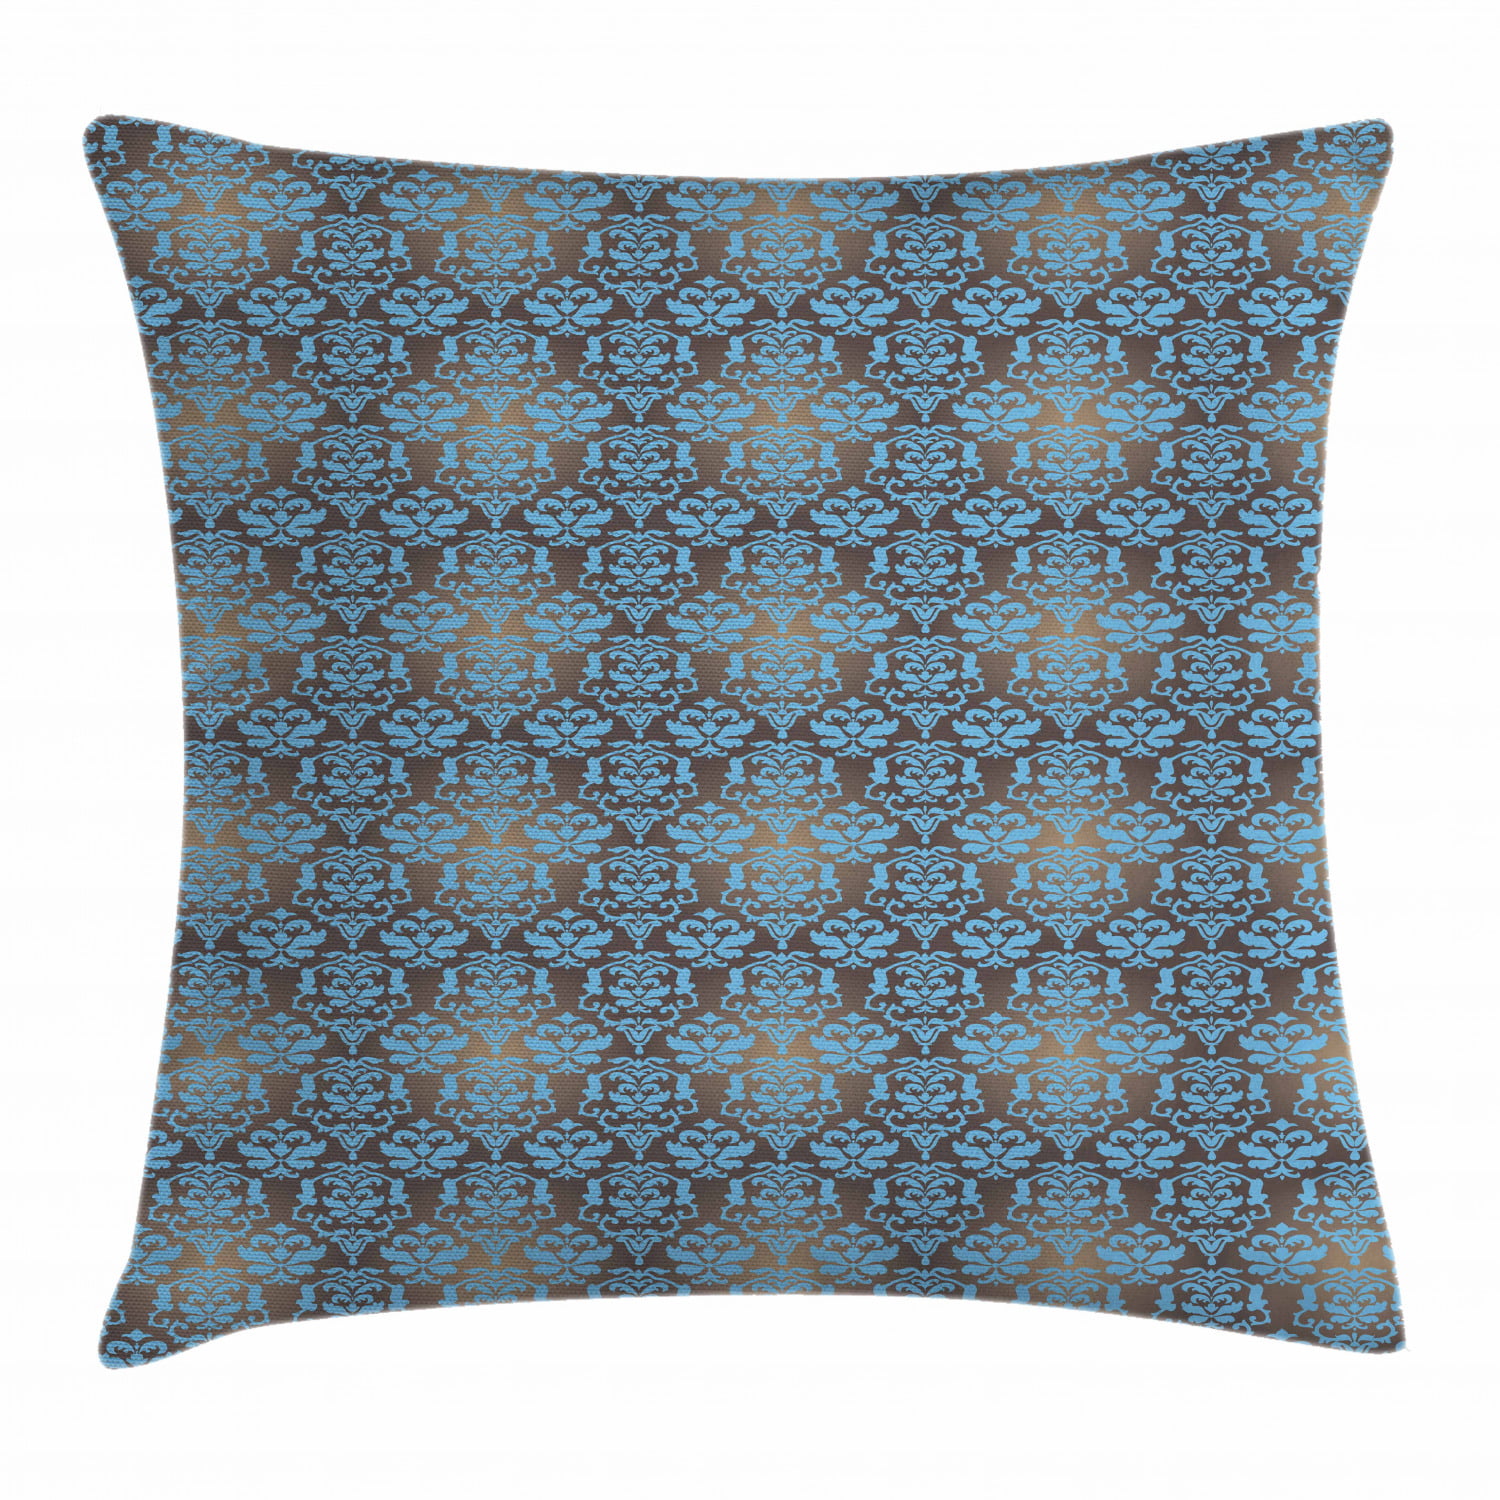 Brown and Blue Throw Pillow Cushion Cover, Ancient Damask Motifs with ...